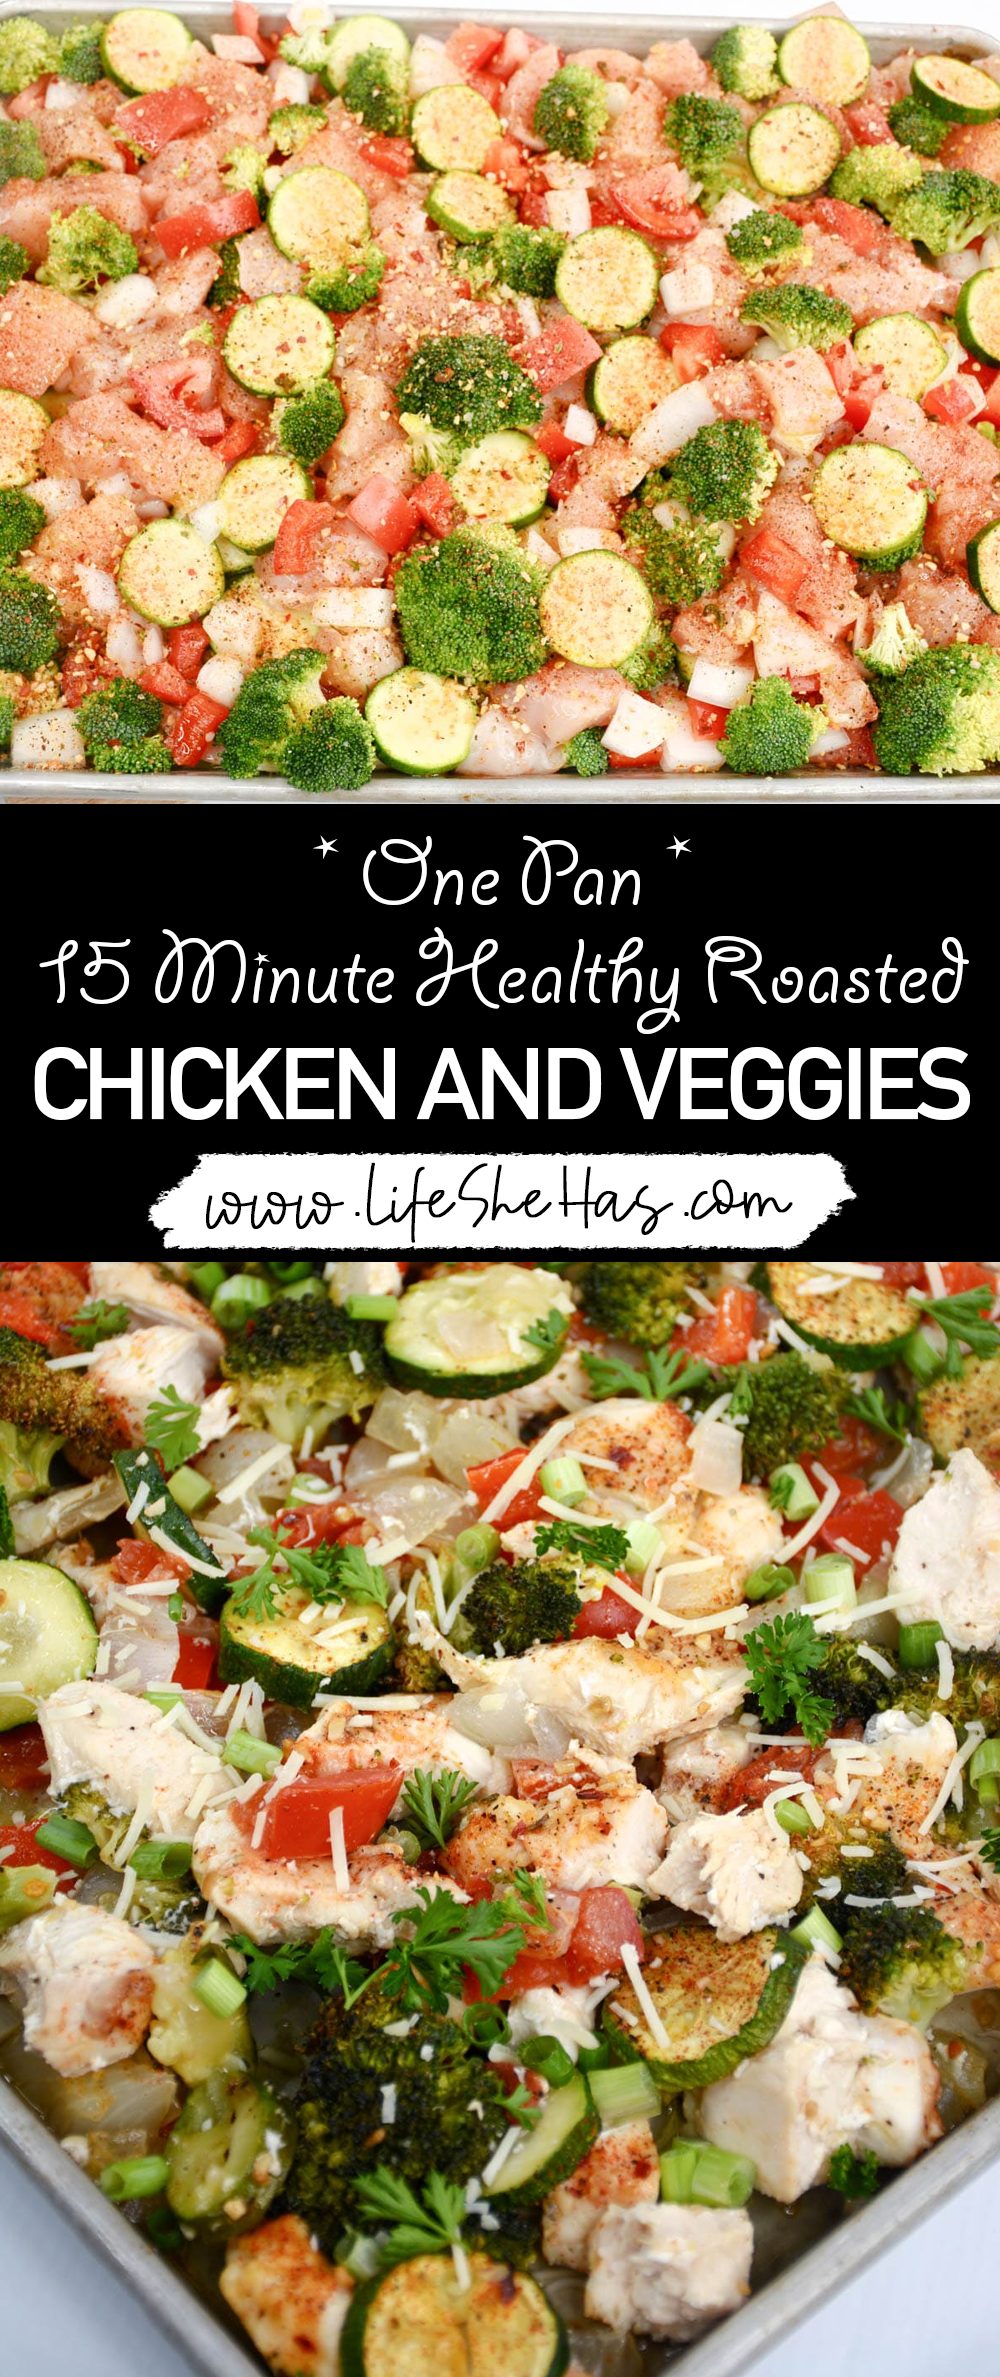 15 Minute Healthy Roasted Chicken and Veggies (One Pan)